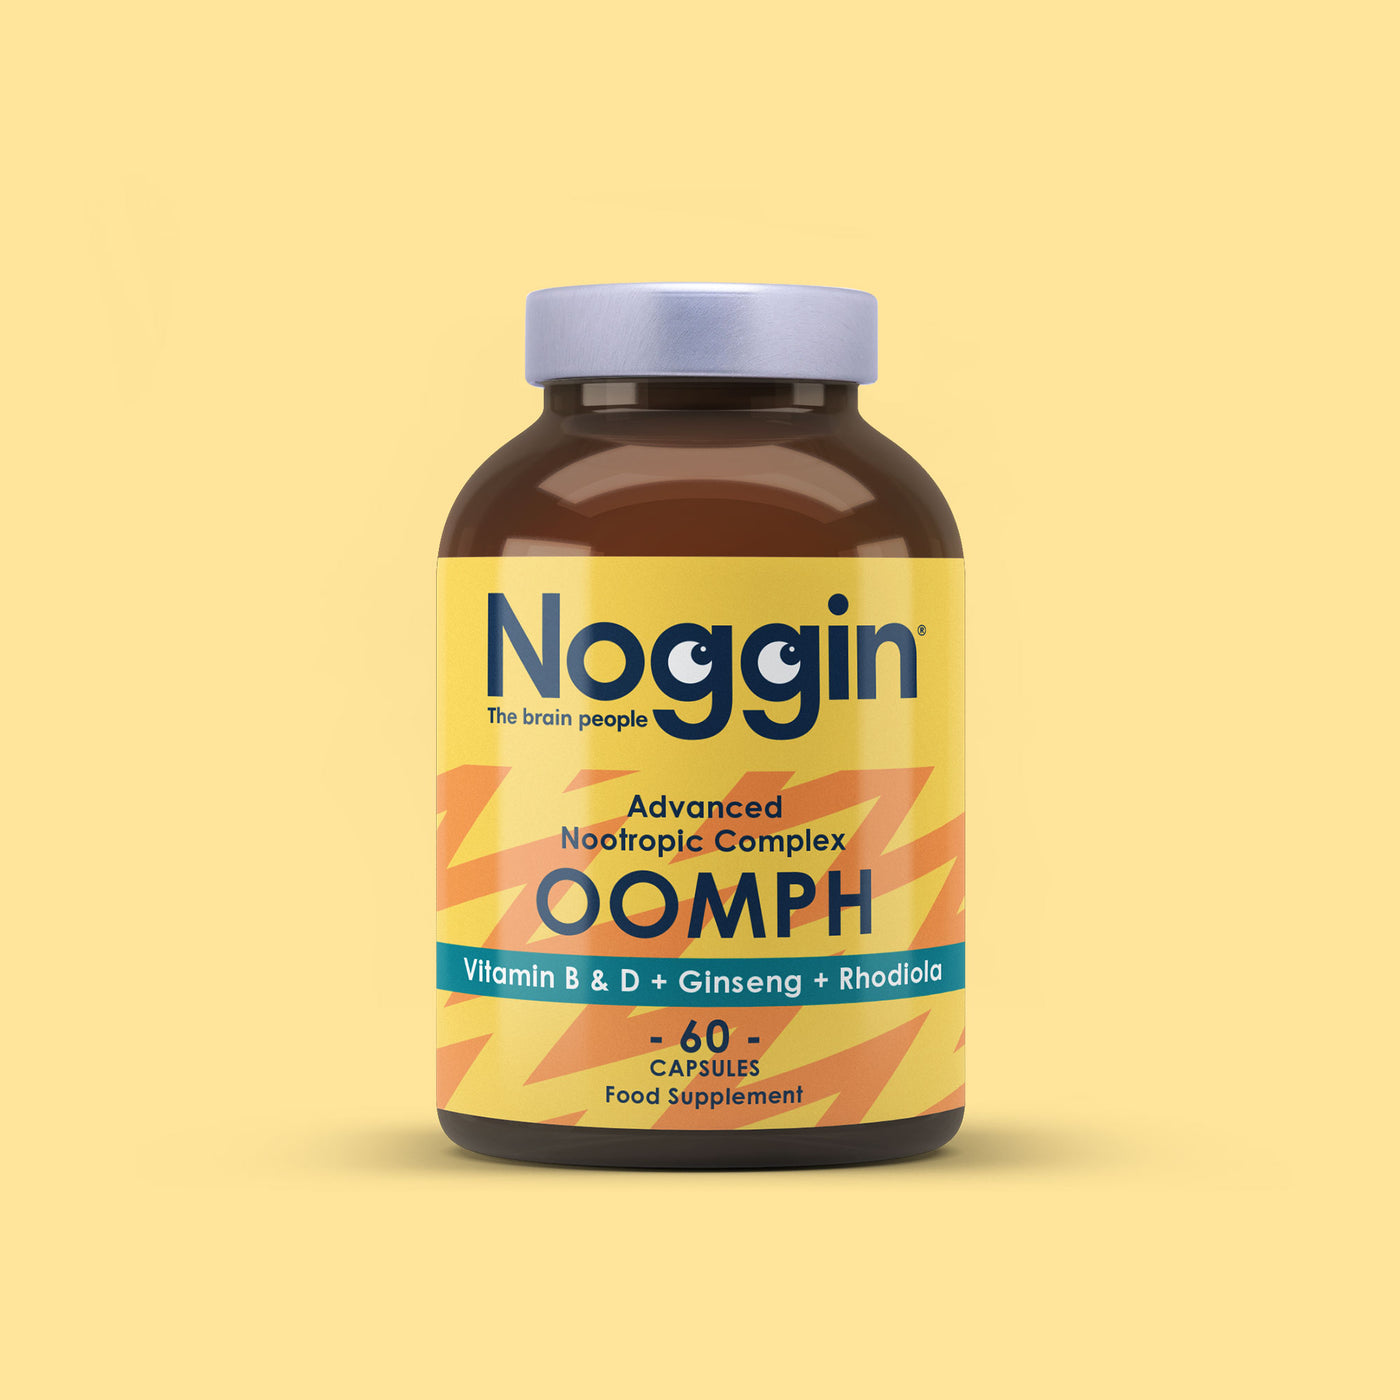 oomph supplements